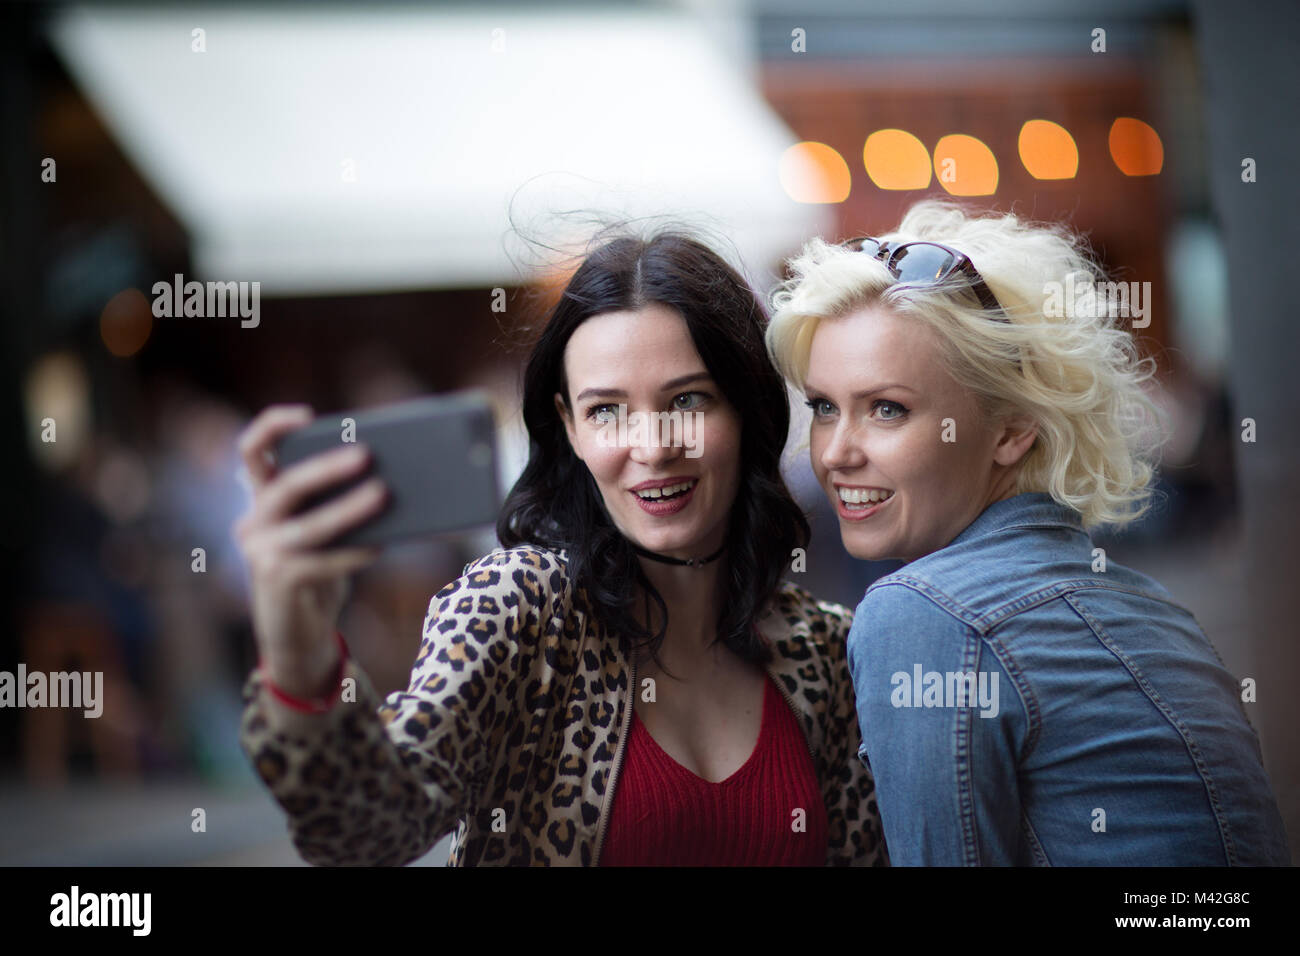 Female friends taking a selfie on a night out Stock Photo